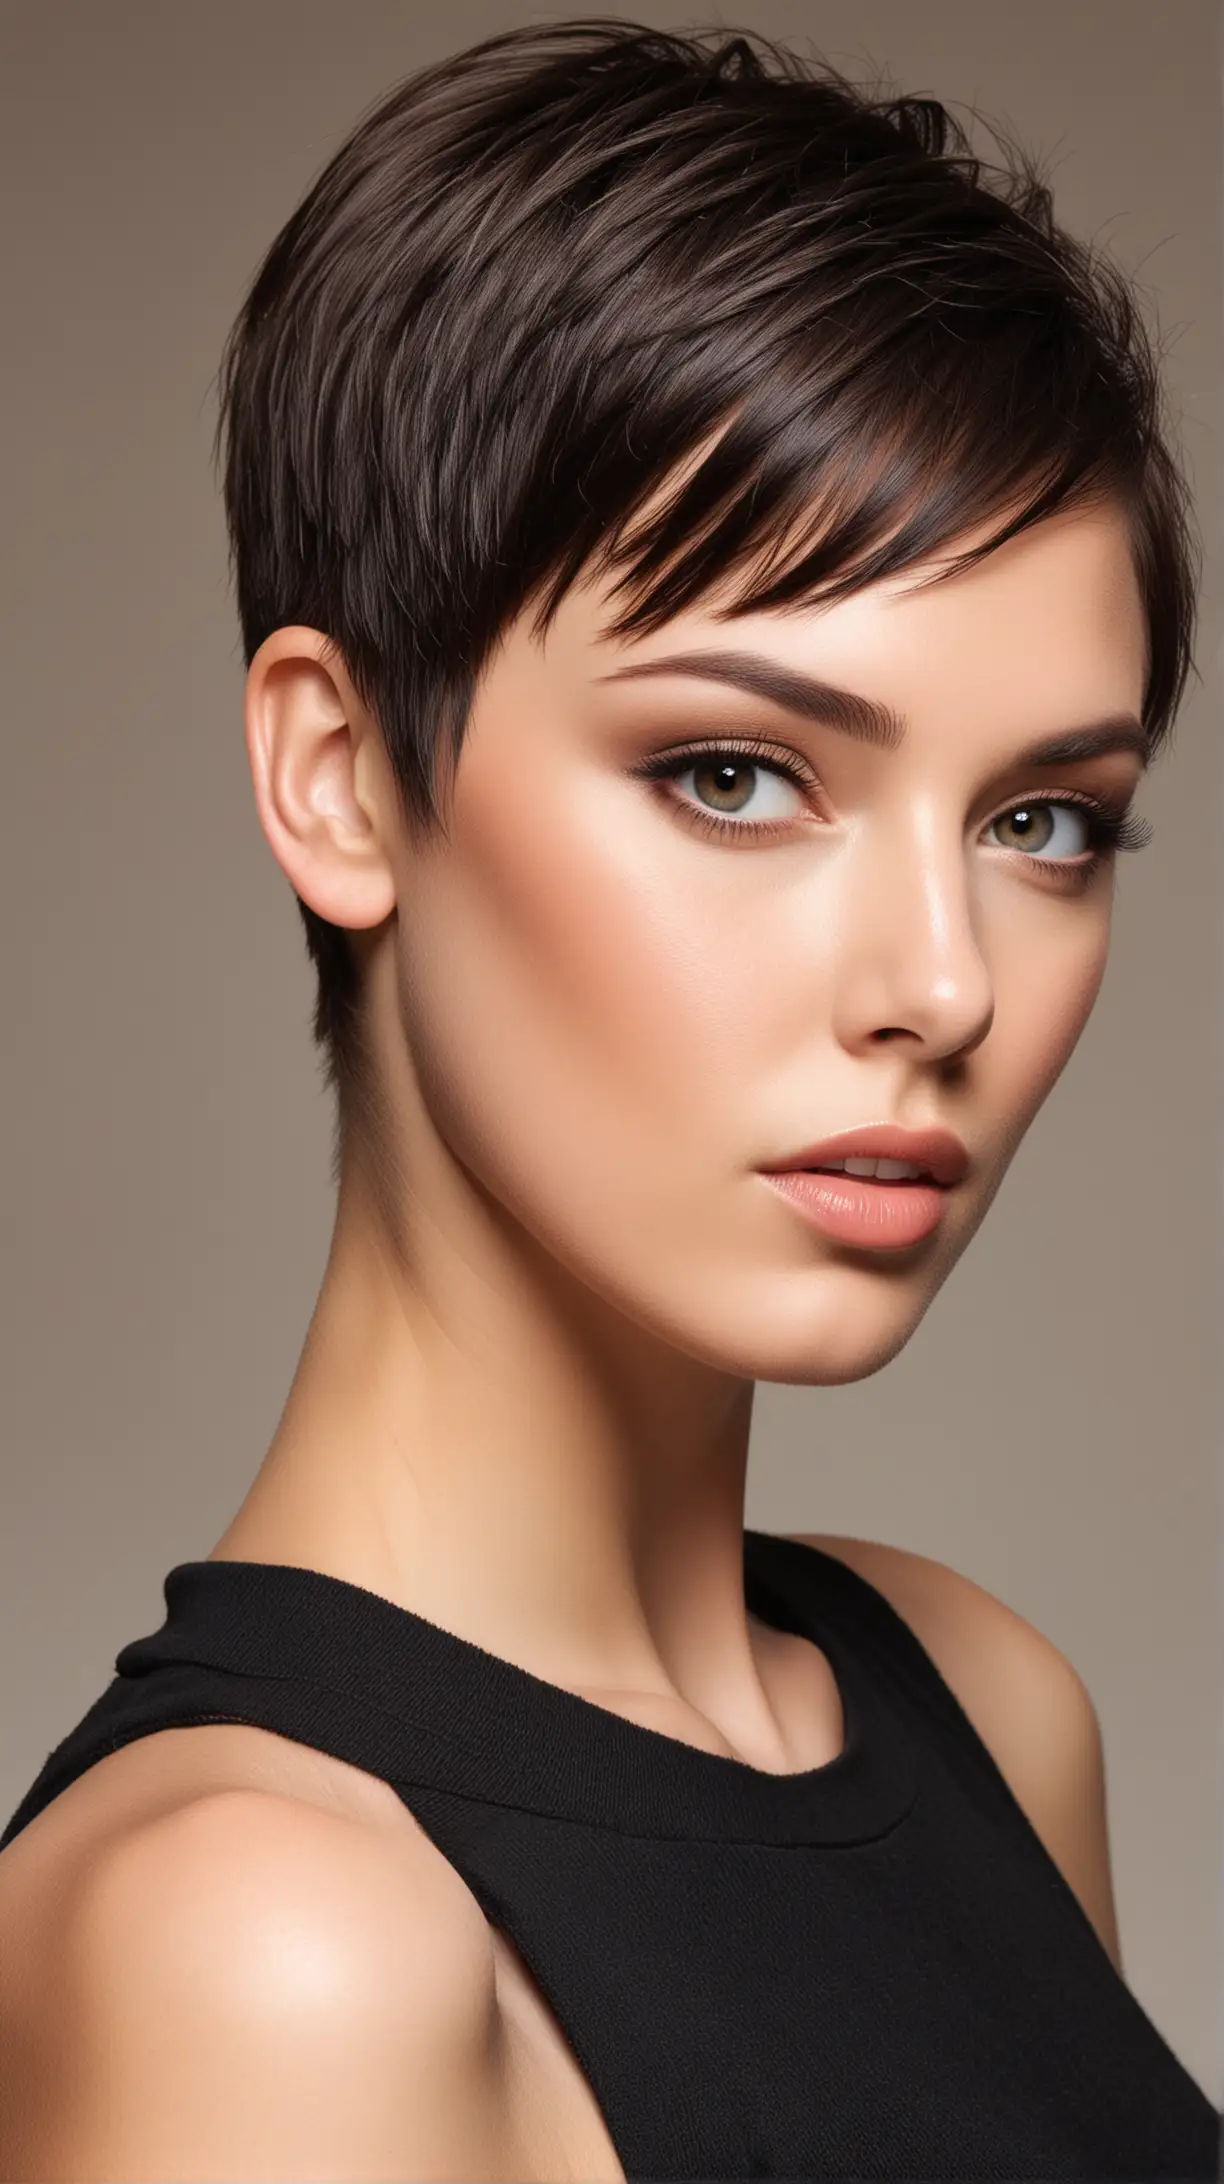 Stylish Urban Chic Haircut Sleek and Short Hairstyle for a Modern Look